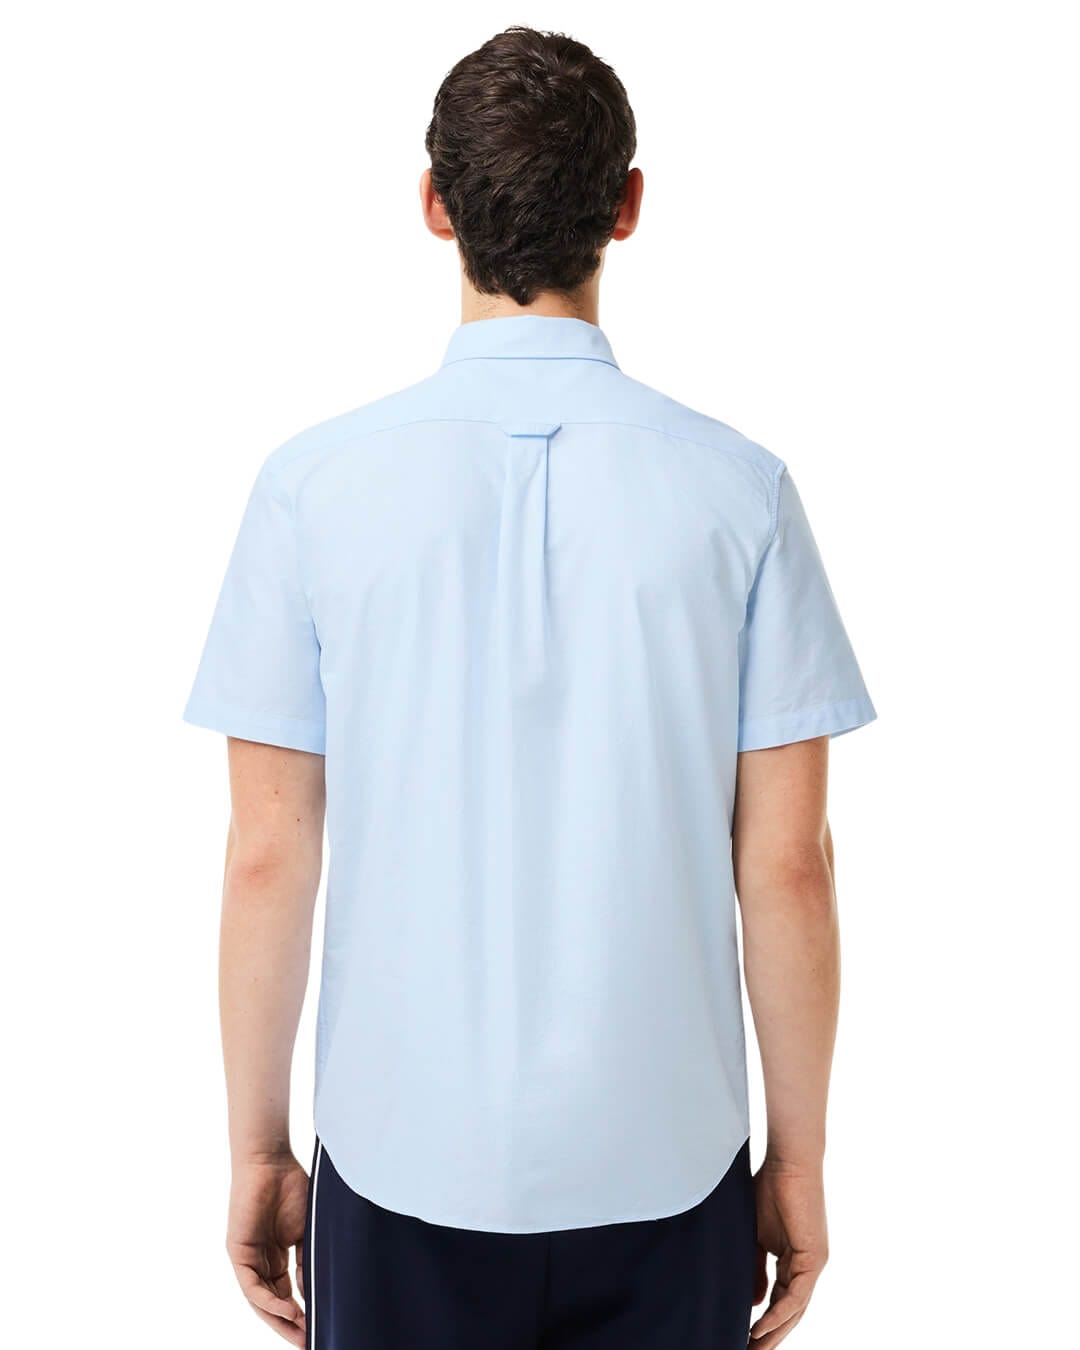 Lacoste Shirts Lacoste Regular Fit Short Sleeved Oxford Blue Shirt